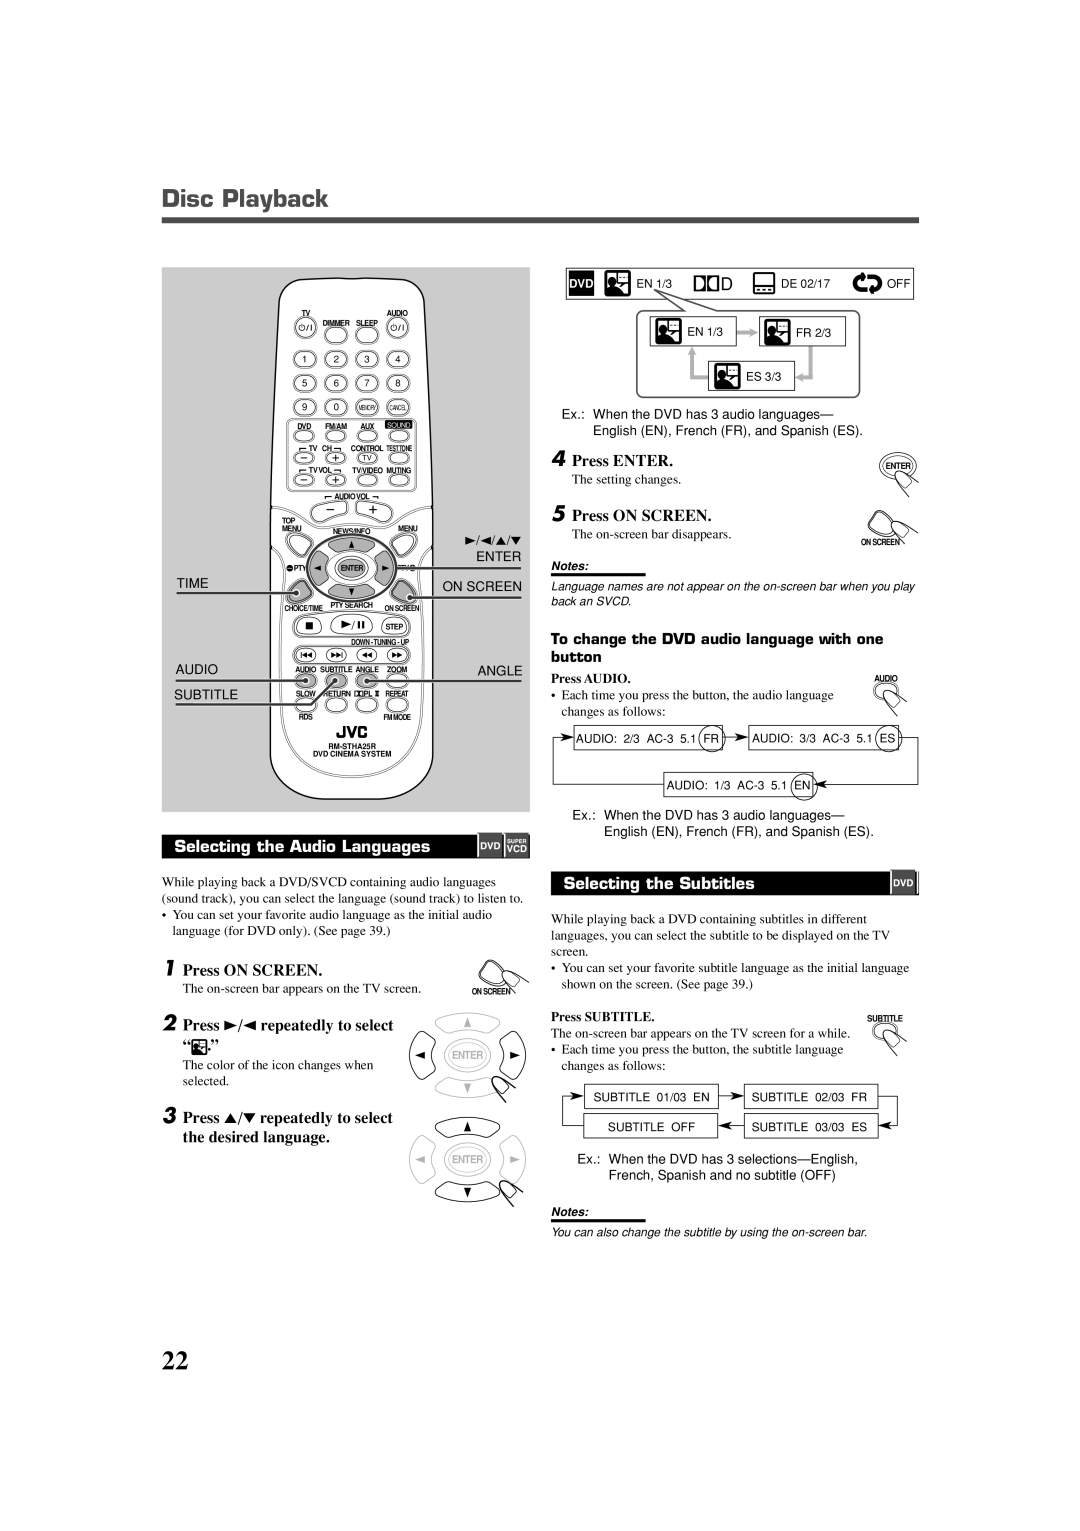 JVC TH-A25 Disc Playback, Selecting the Audio Languages, Press ON SCREEN, Press 3/2 repeatedly to select “ .”, Press ENTER 